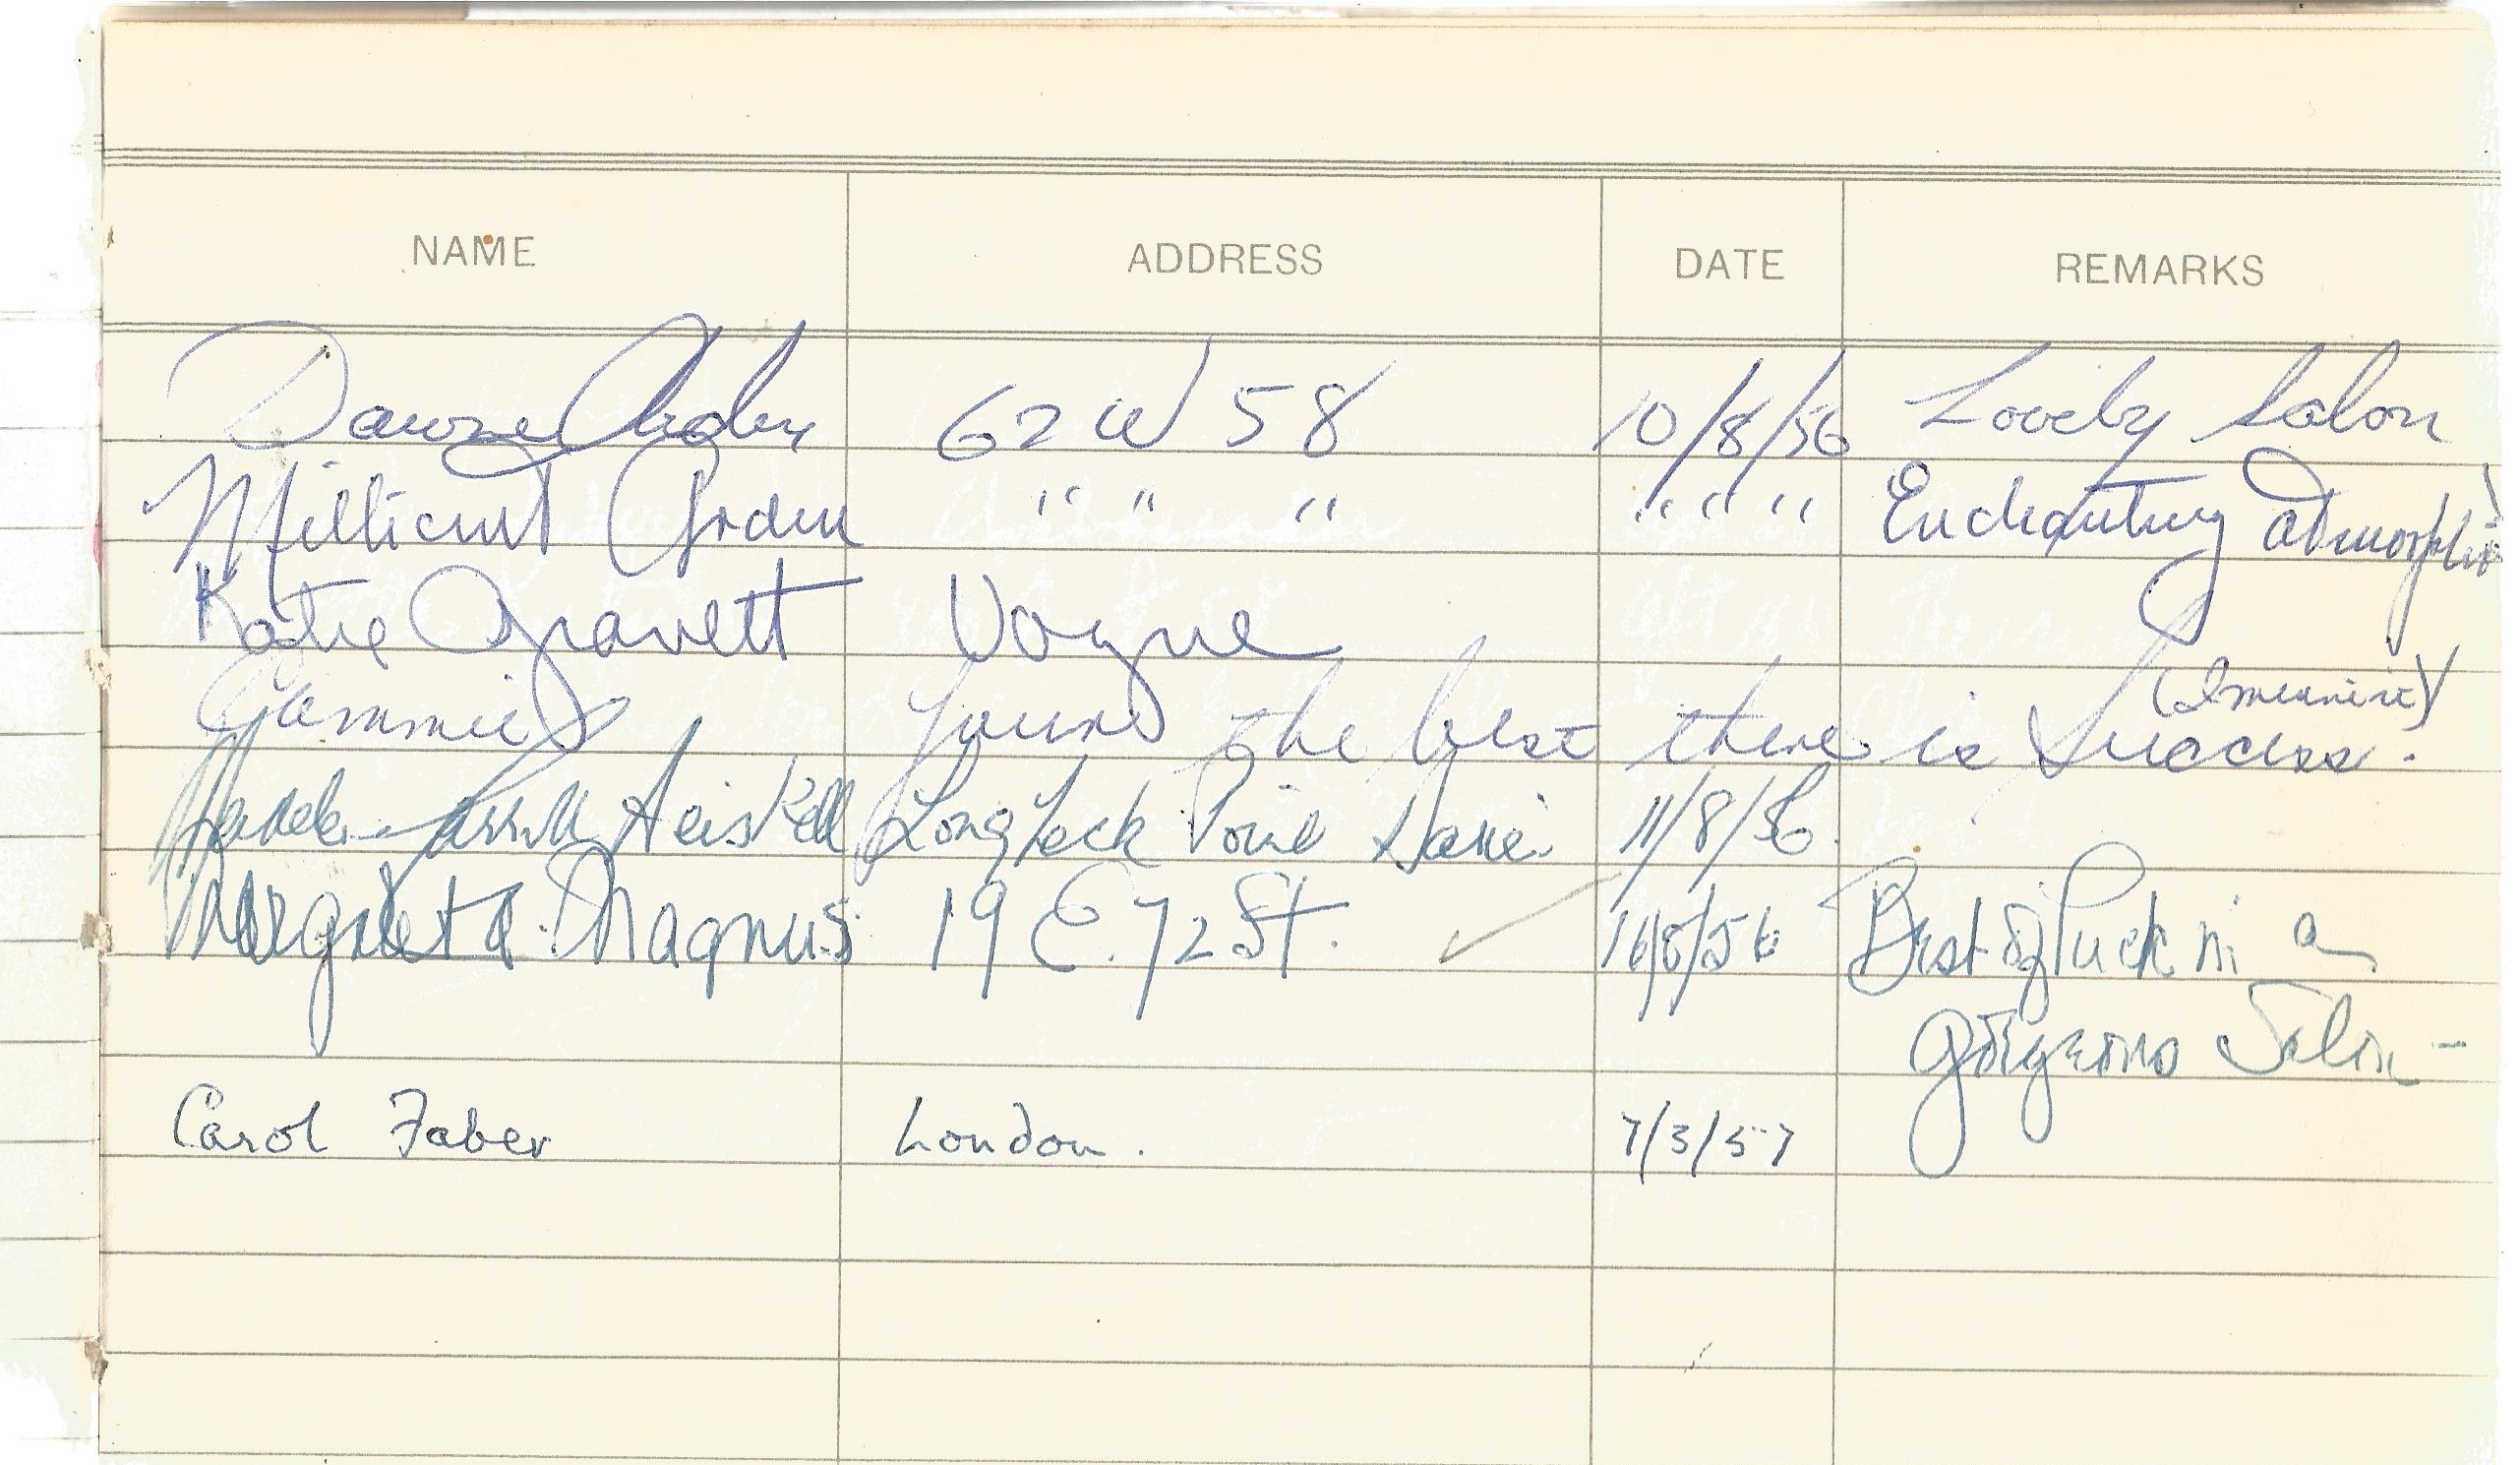 Vintage Guest Book belonging to JOHN BERNARD who was MD & ARTISTIC ADVISOR at THE HOUSE OF REVLON in - Image 2 of 10